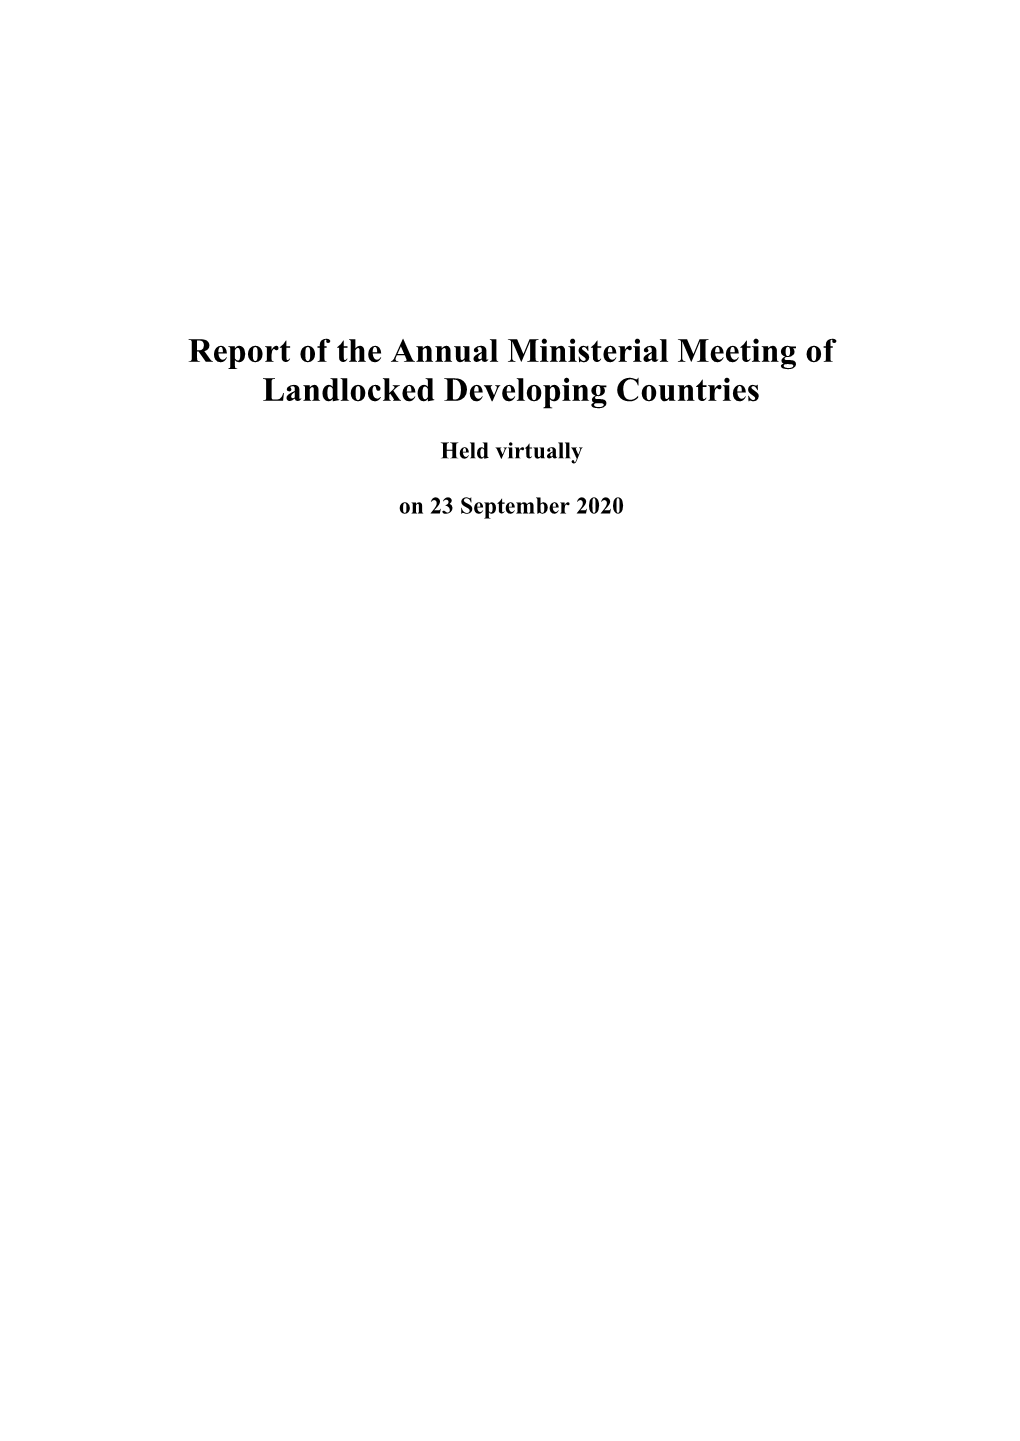 Report of the Annual Ministerial Meeting of Landlocked Developing Countries